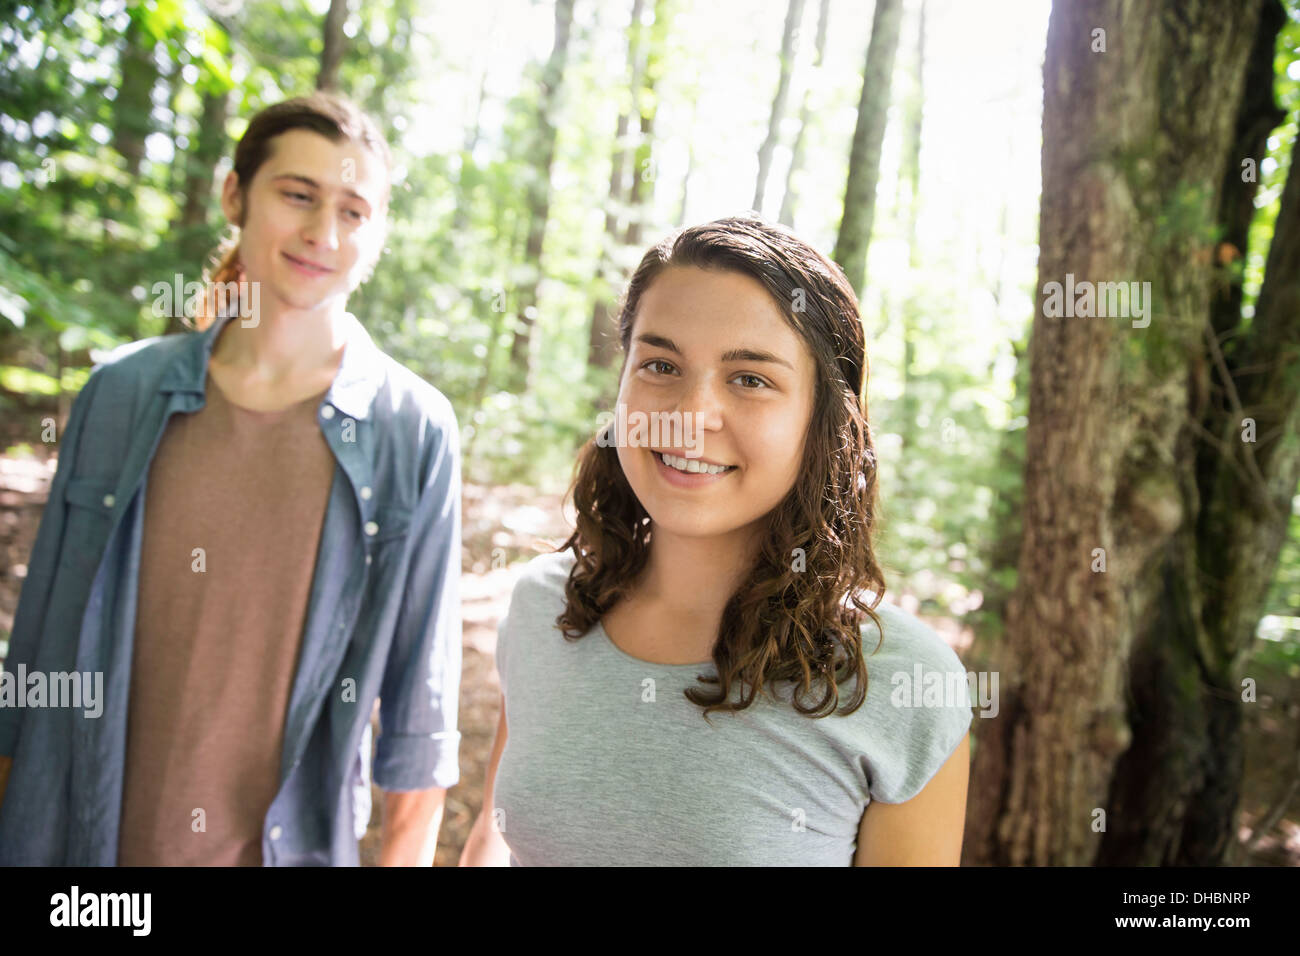 Two people, a young woman and man, walking side by side in the woods. Stock Photo